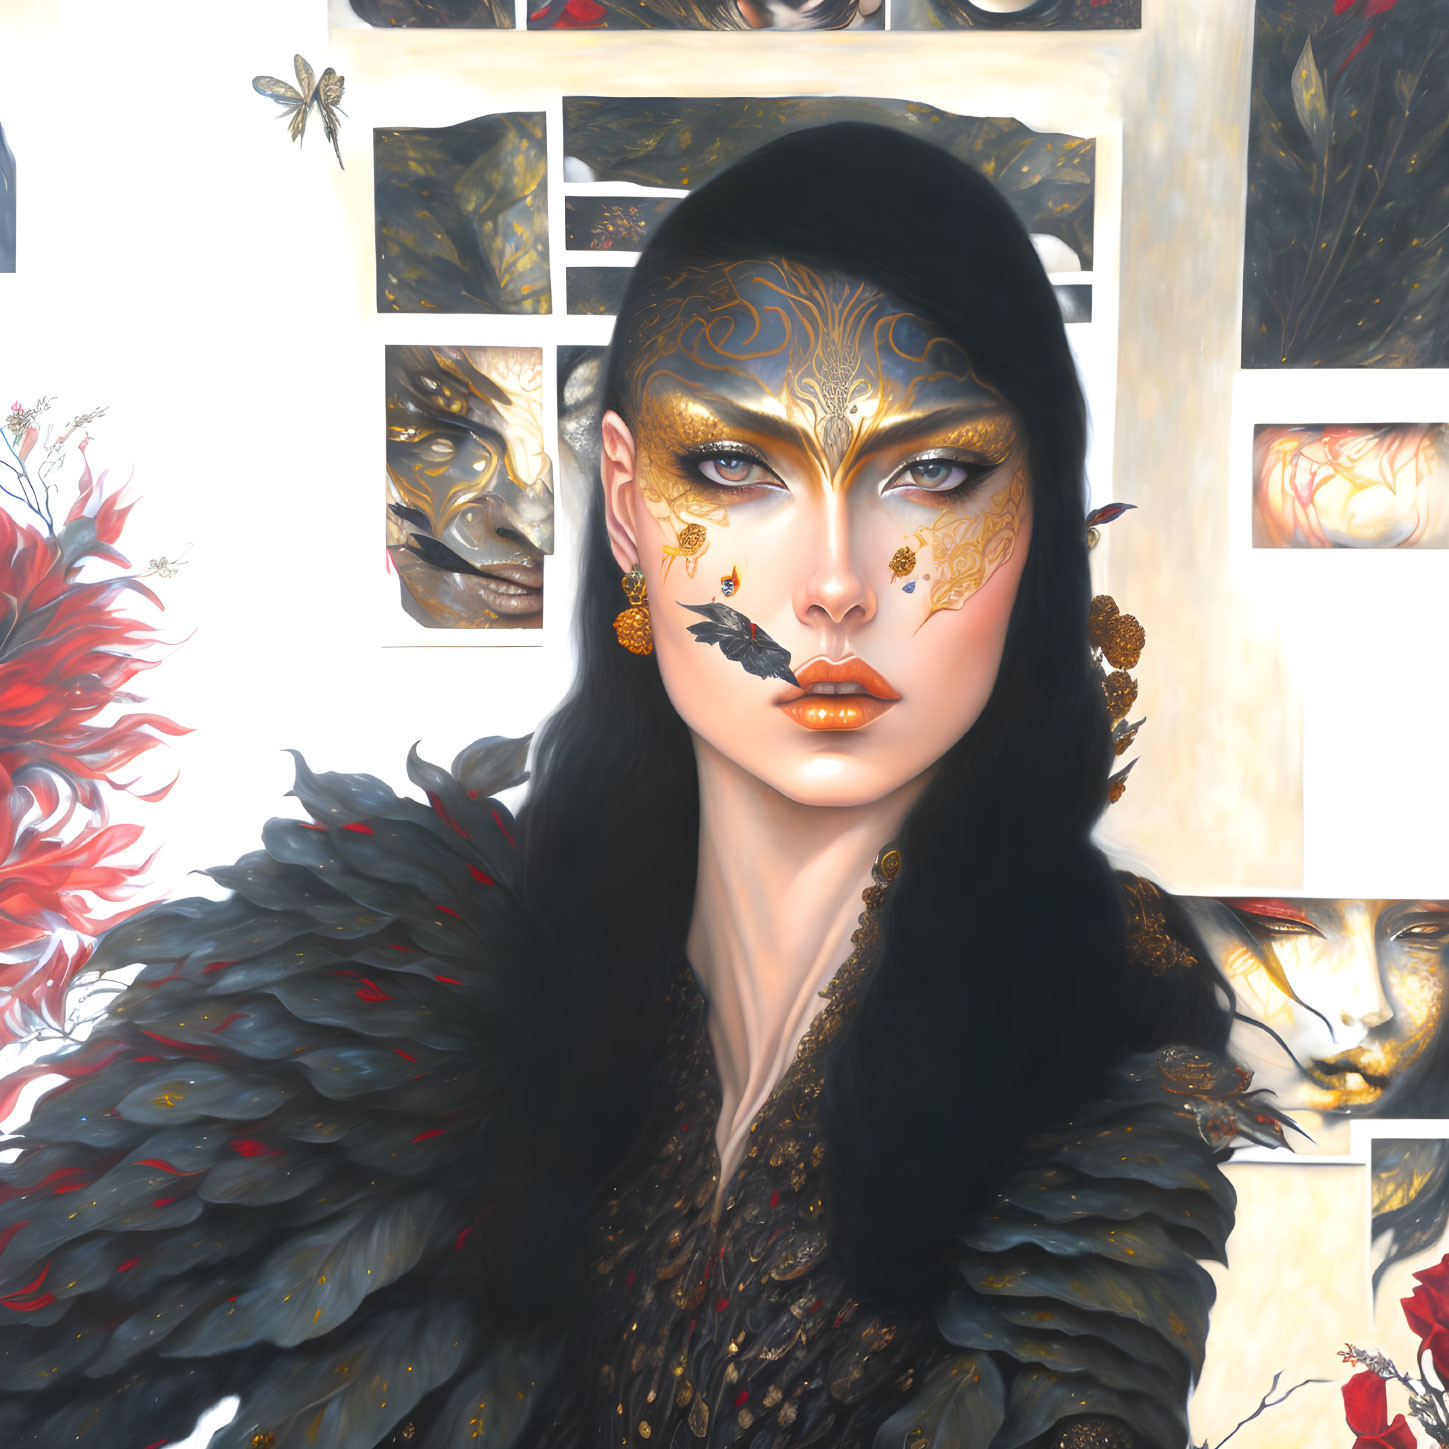 Digital painting of woman with black hair, golden facial tattoos, dark lipstick, and feathered black garment